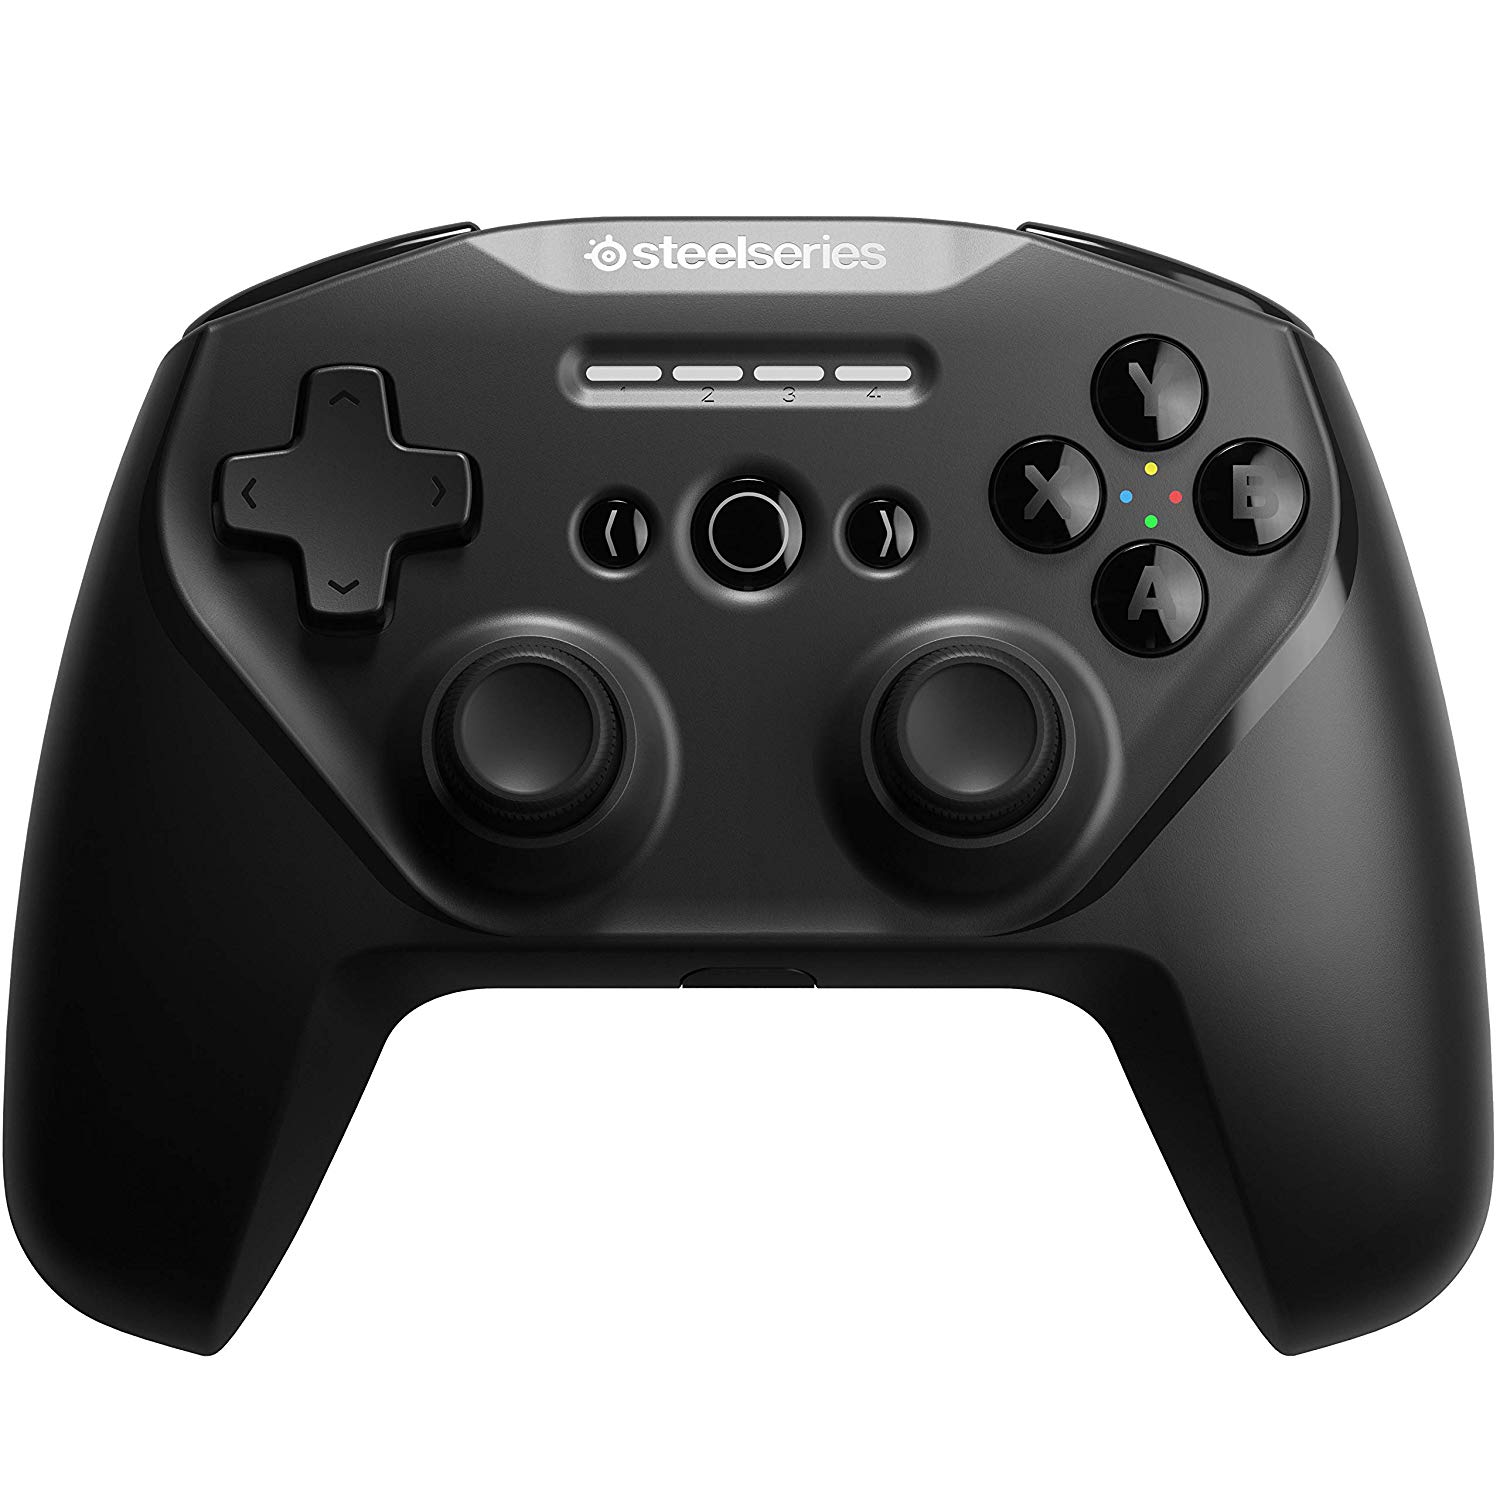 Play some awesome Xbox Game Pass games with these controllers